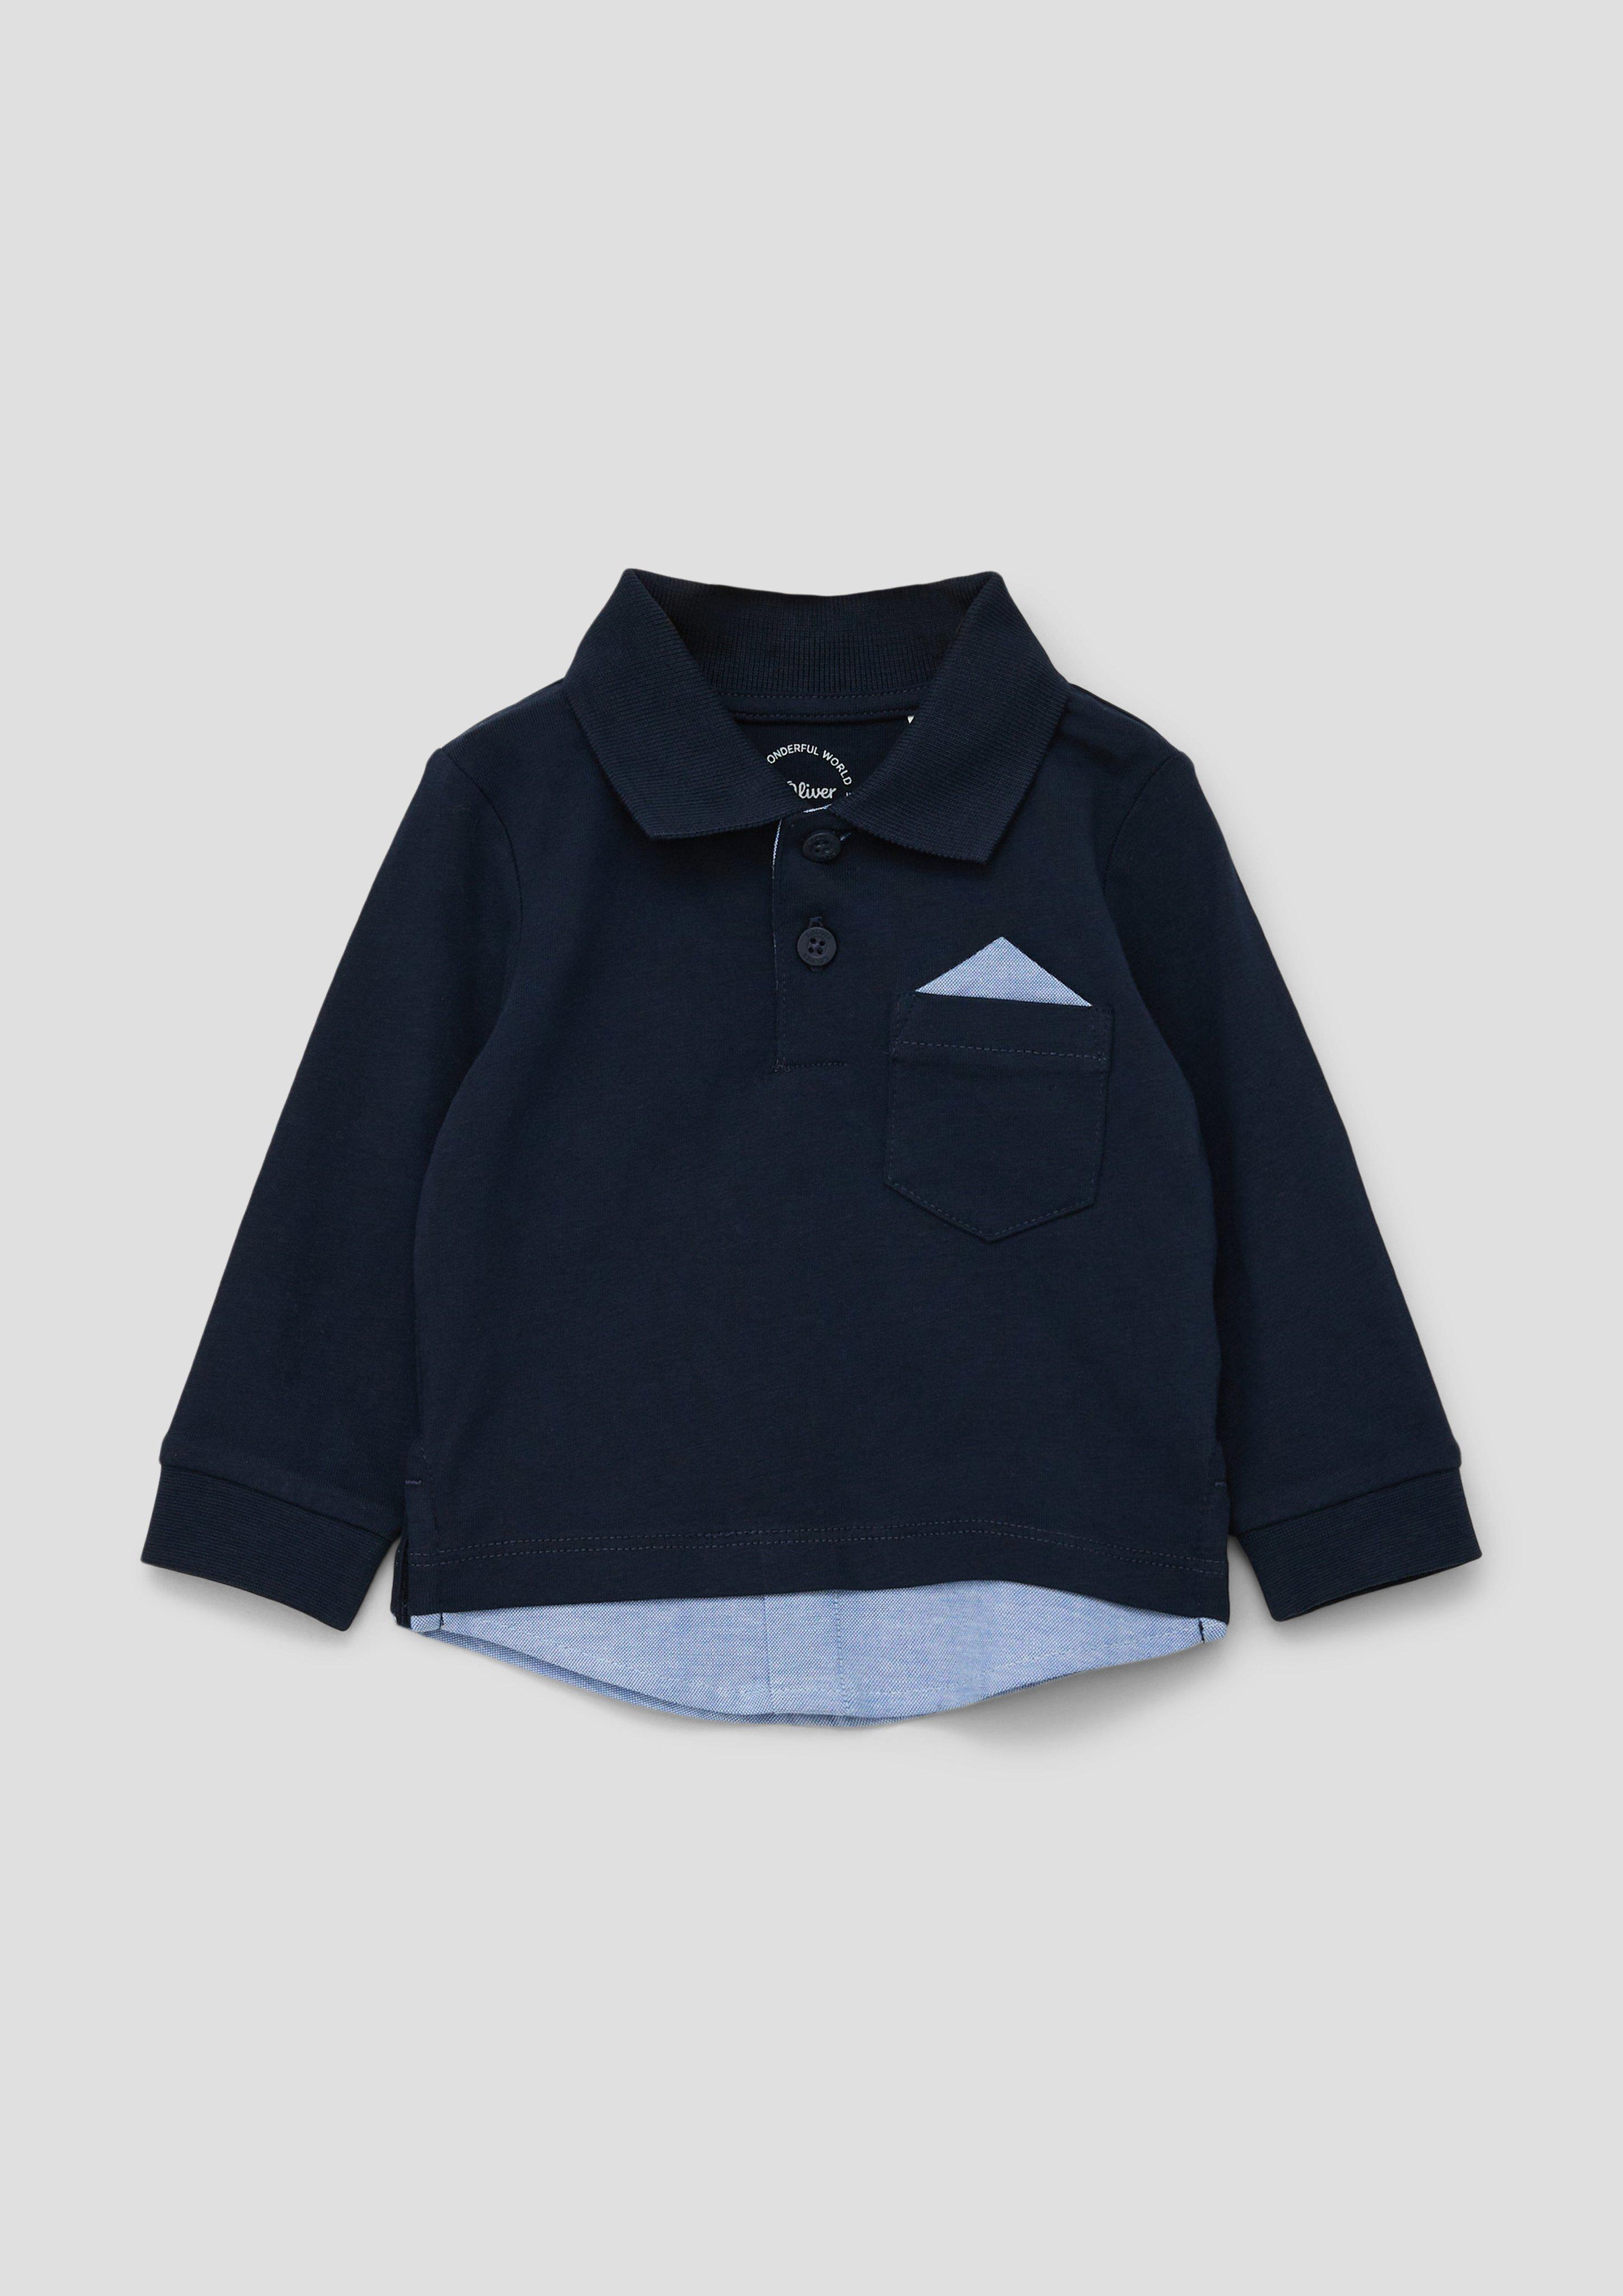 - in Polo layered shirt look a navy